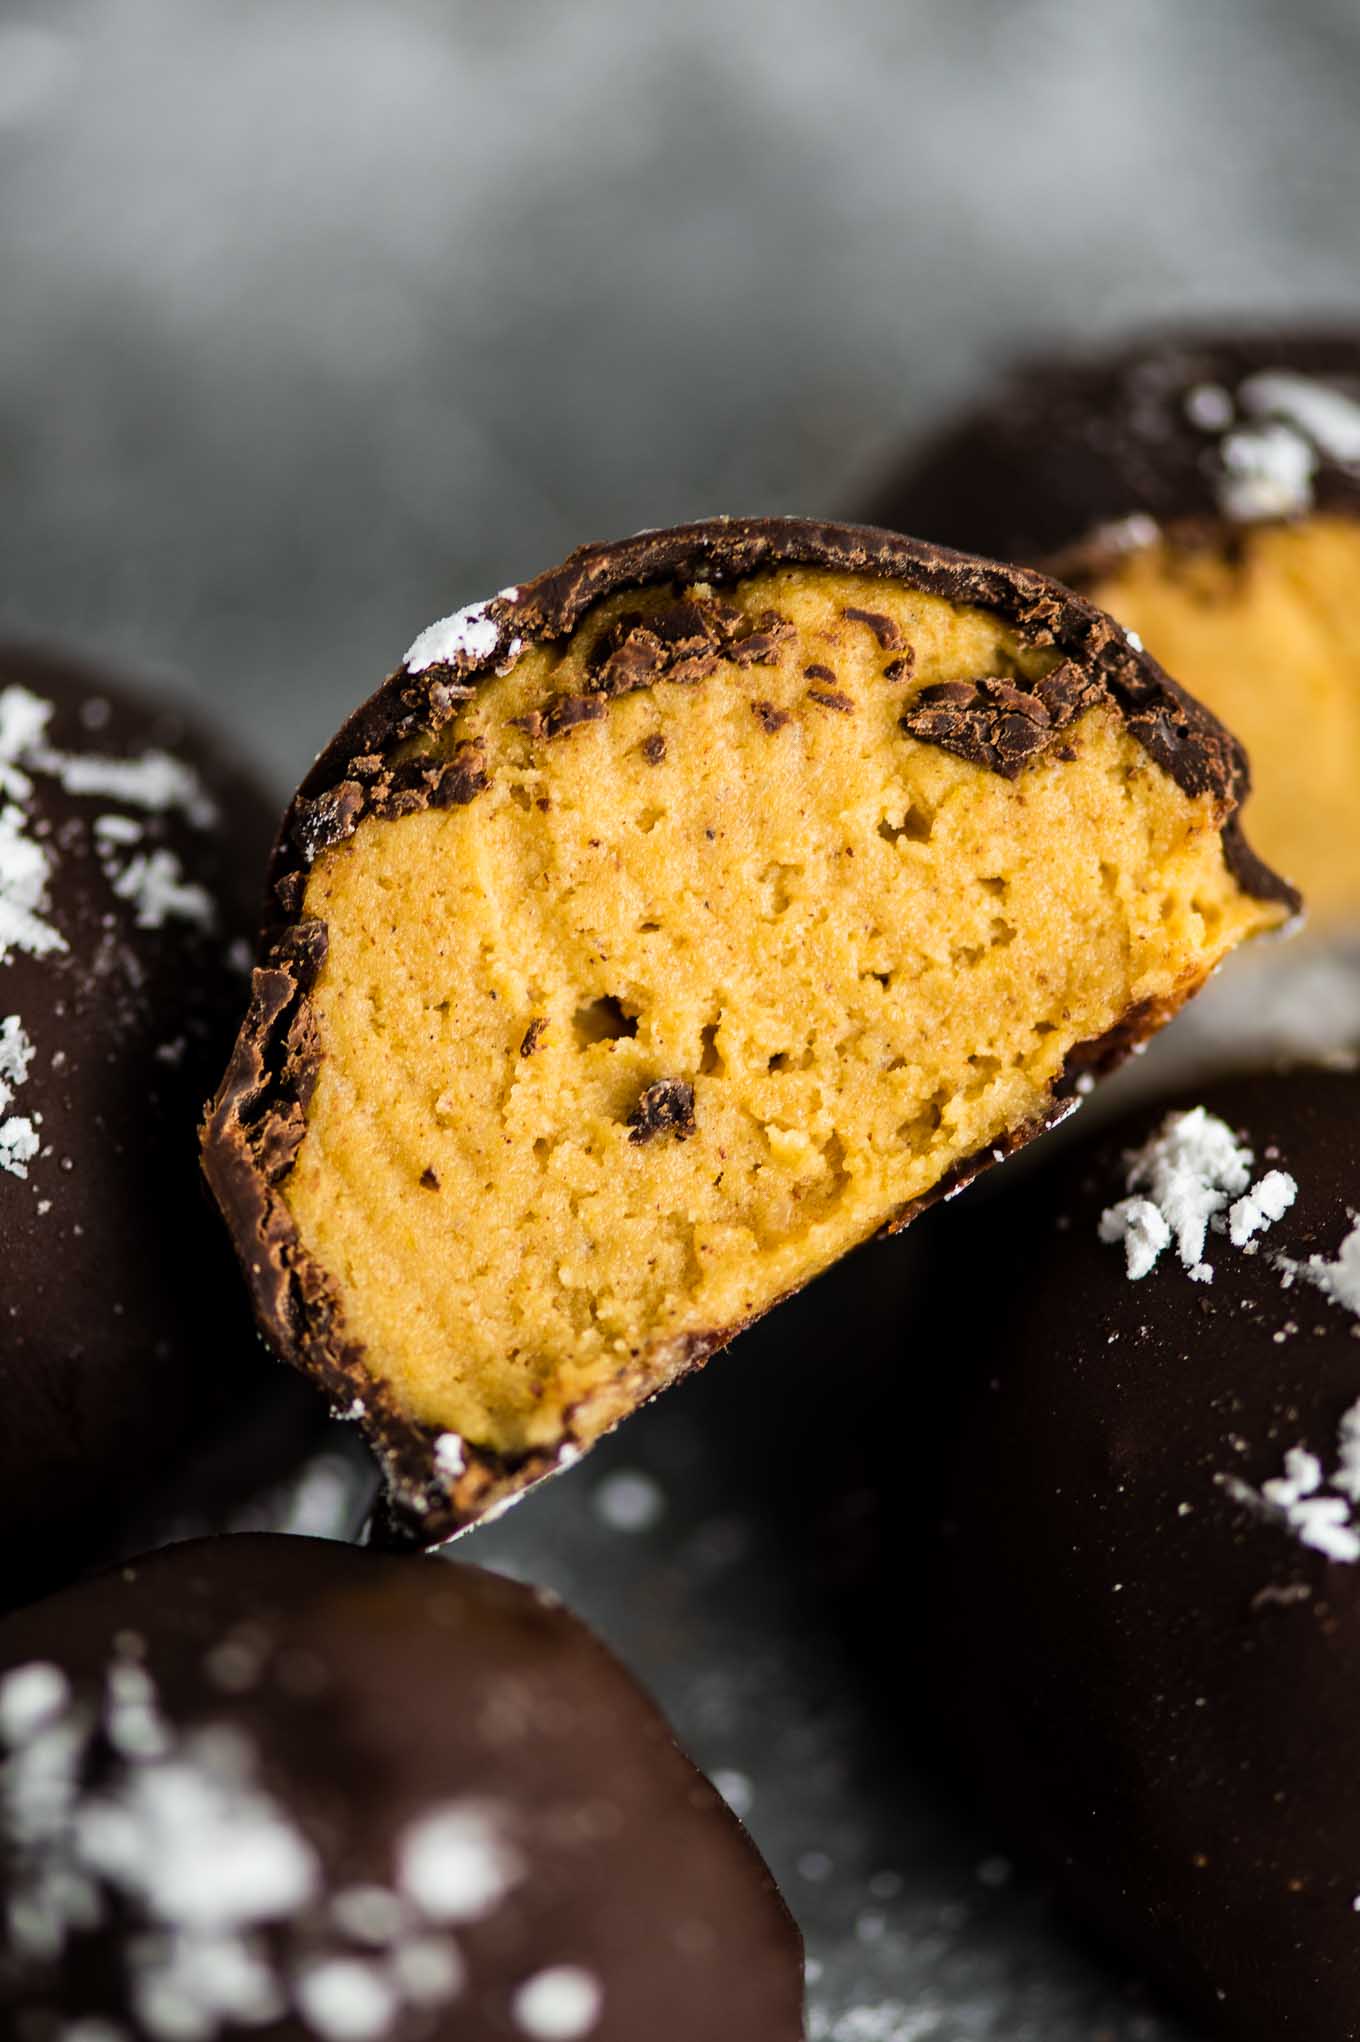 pumpkin truffle cut in half to show the cheesecake filling